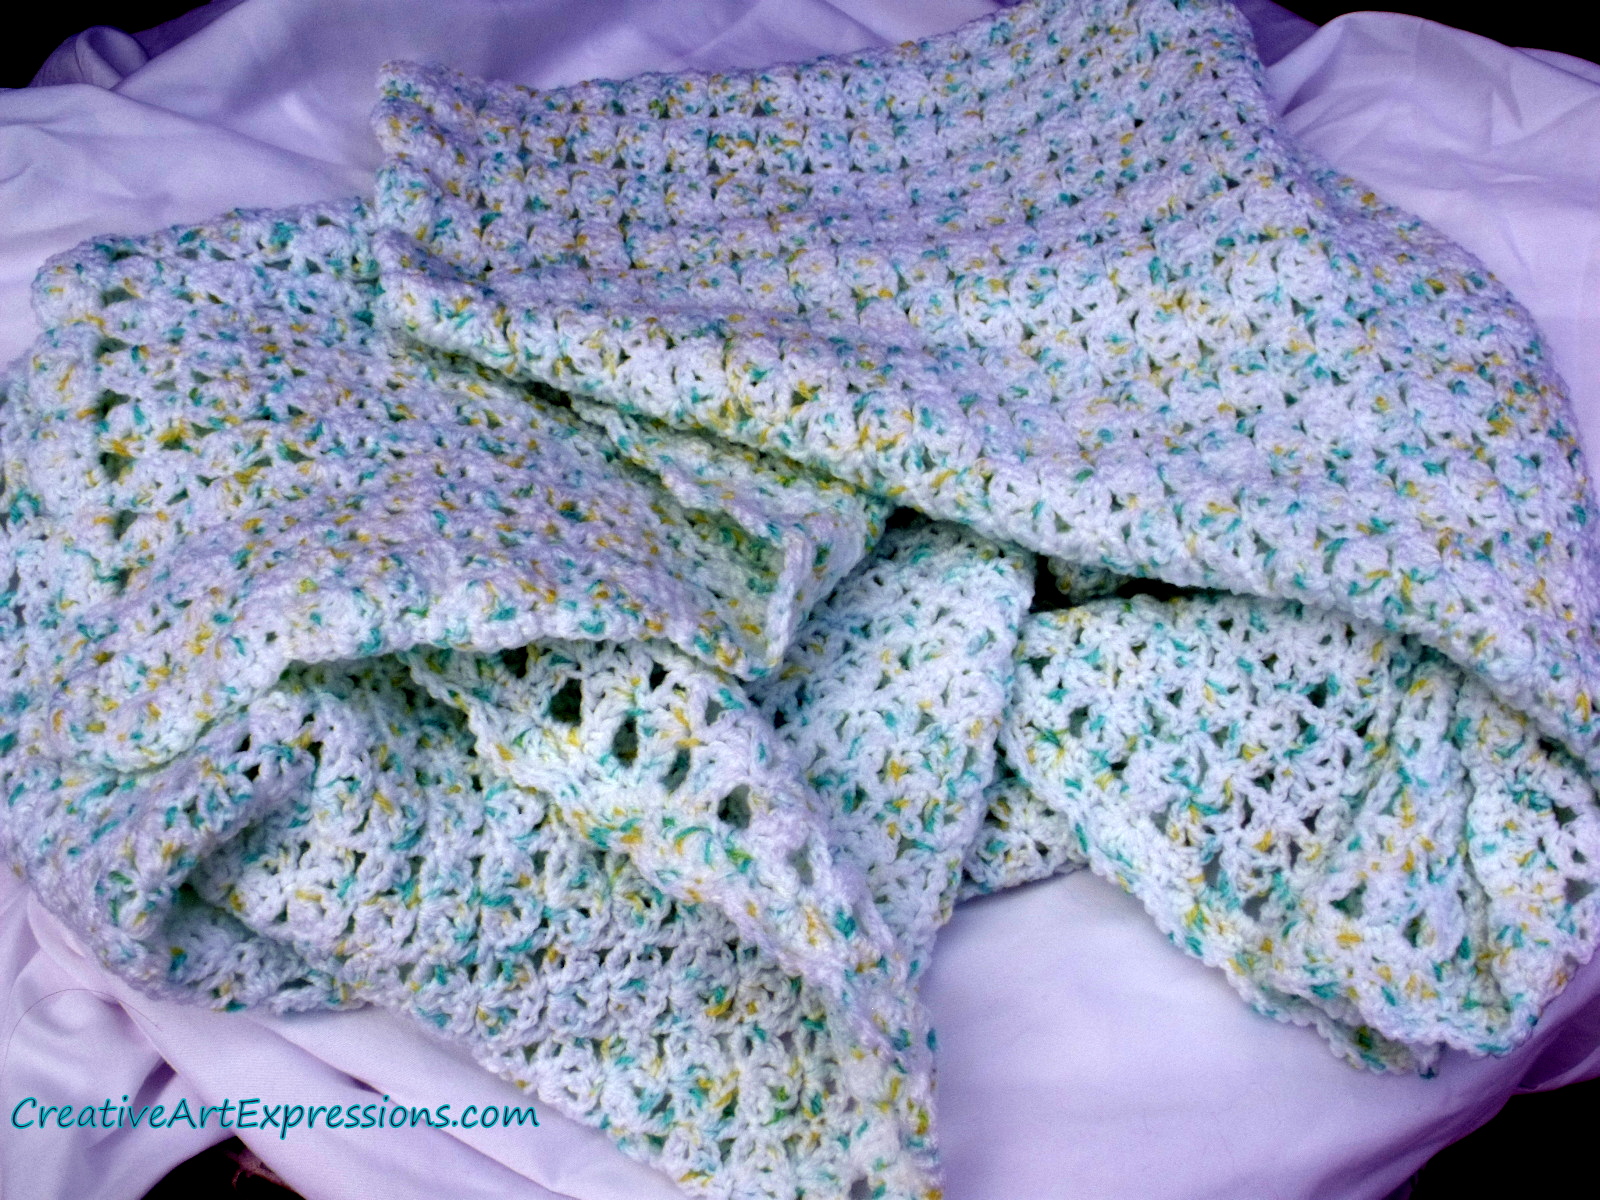 Creative Art Expressions Hand Crocheted Baby Blanket